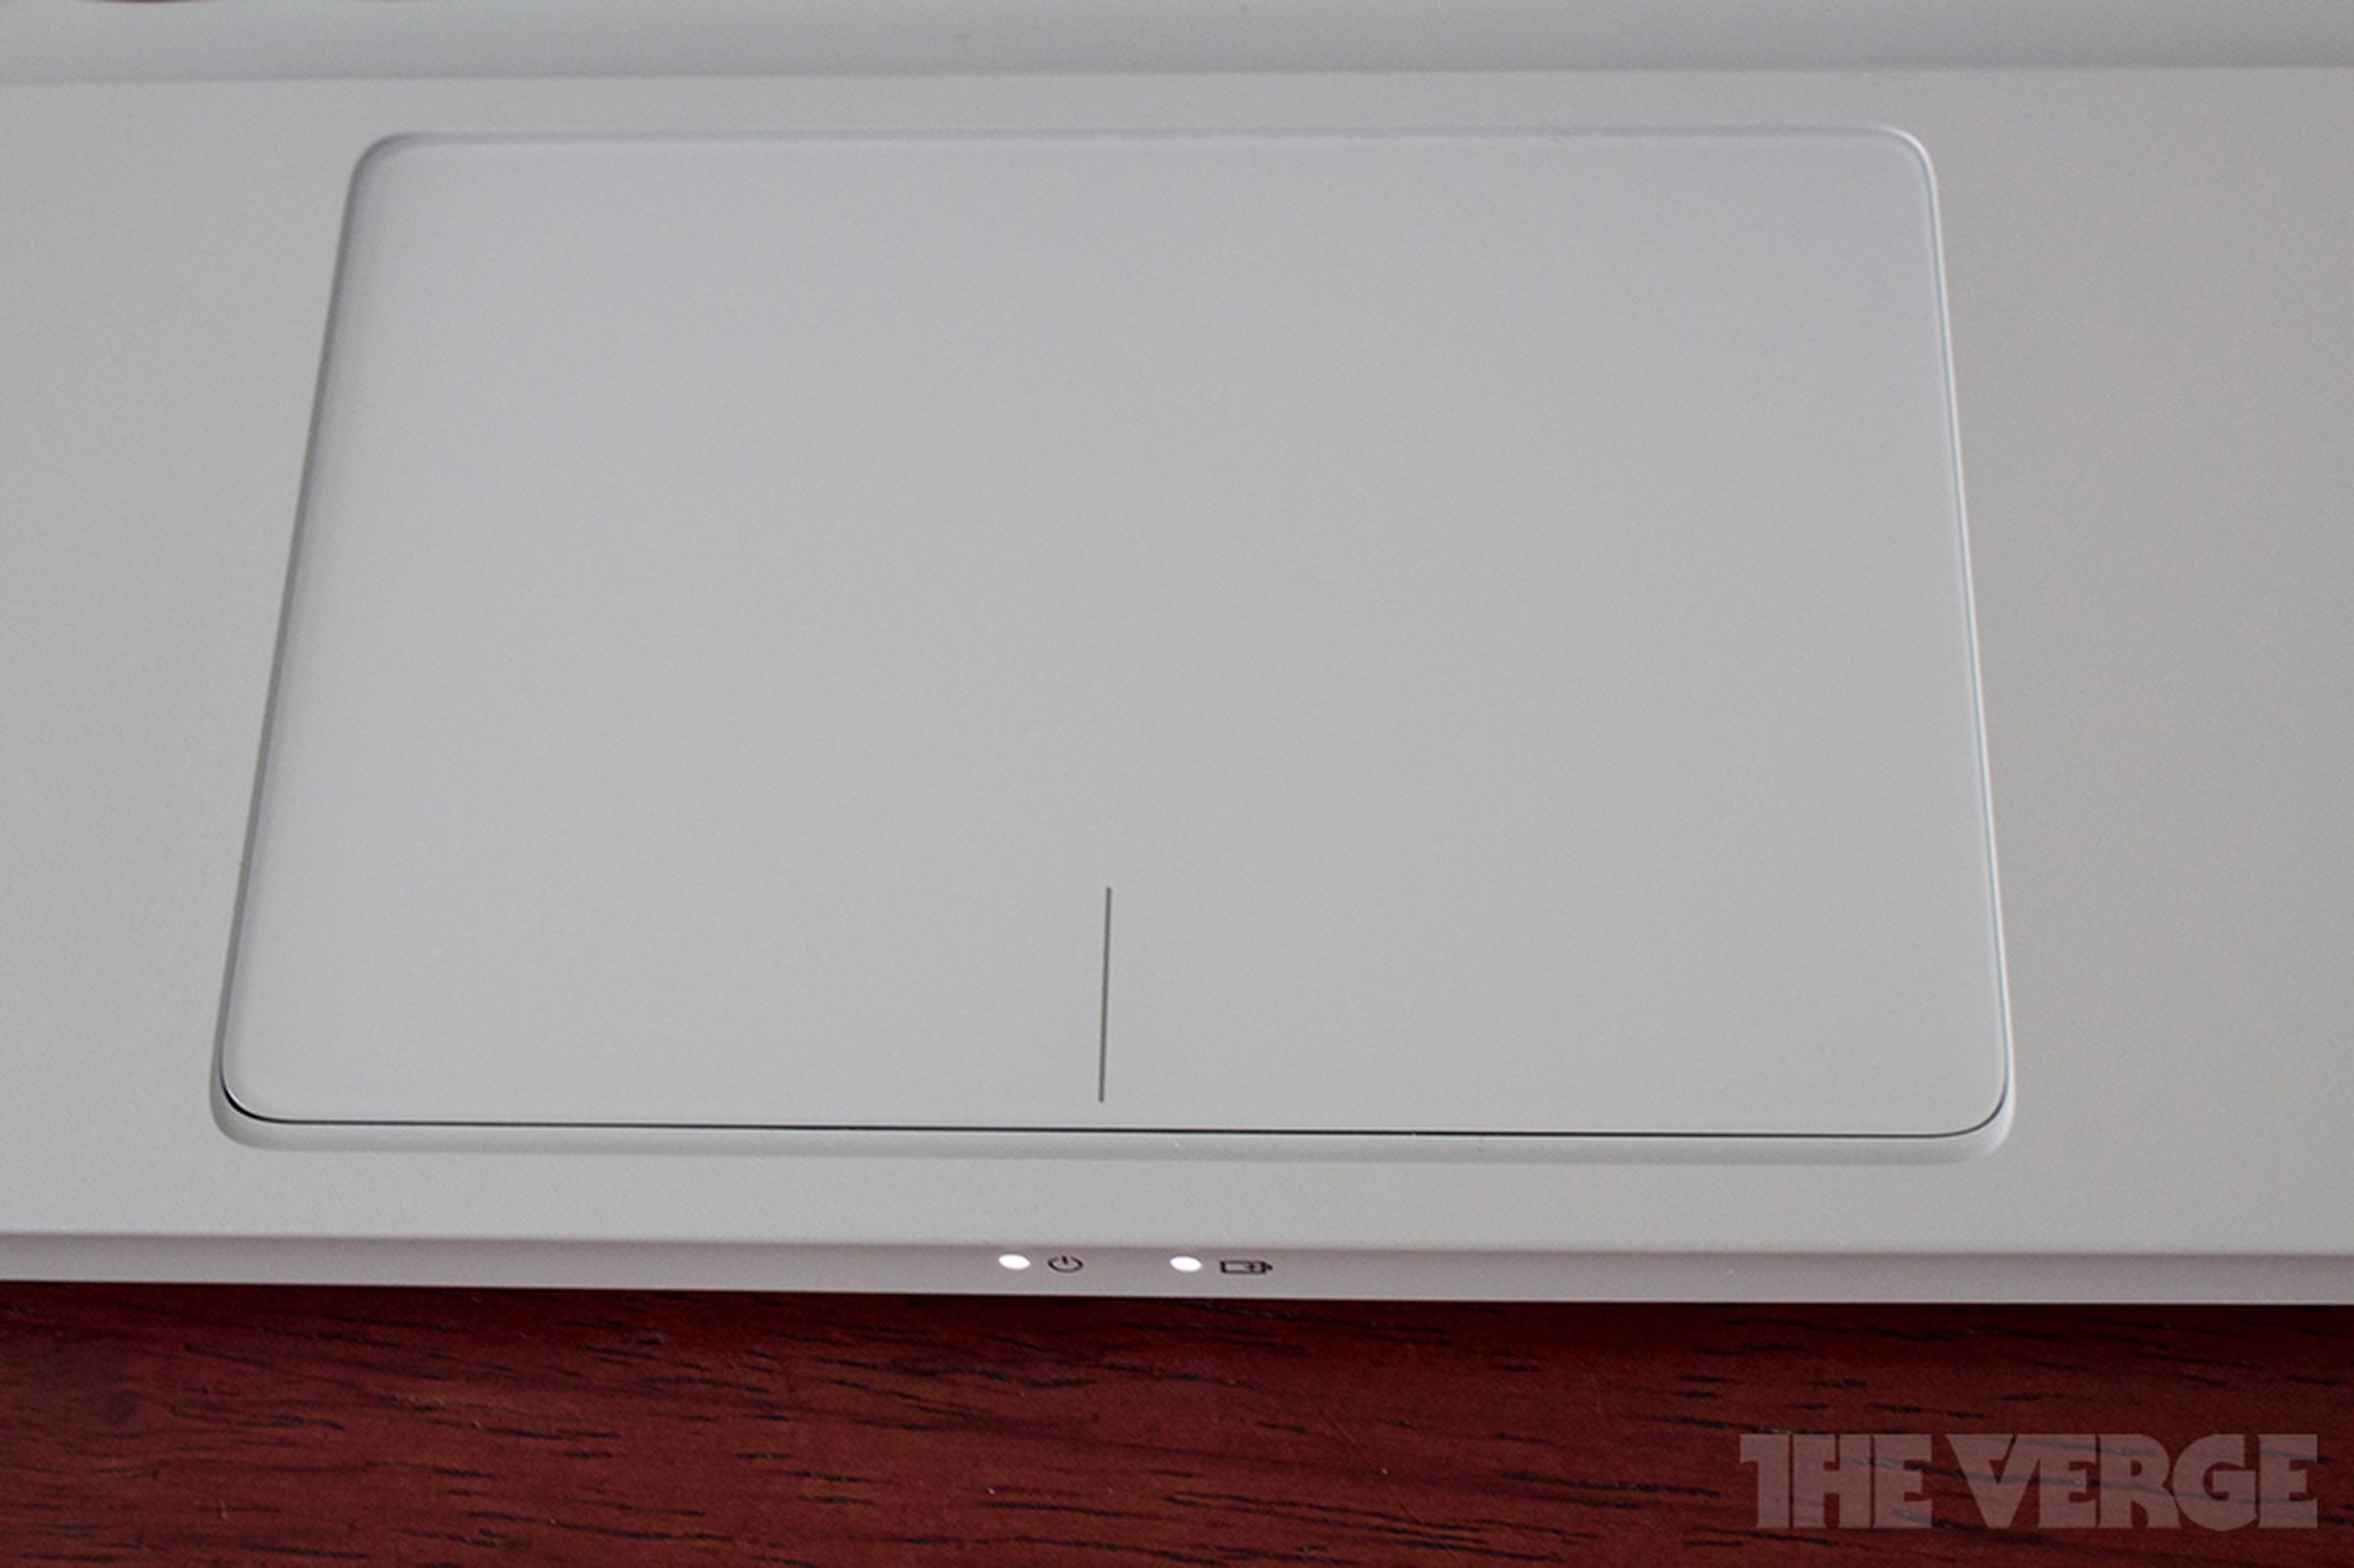 Lenovo IdeaPad U310 review pictures